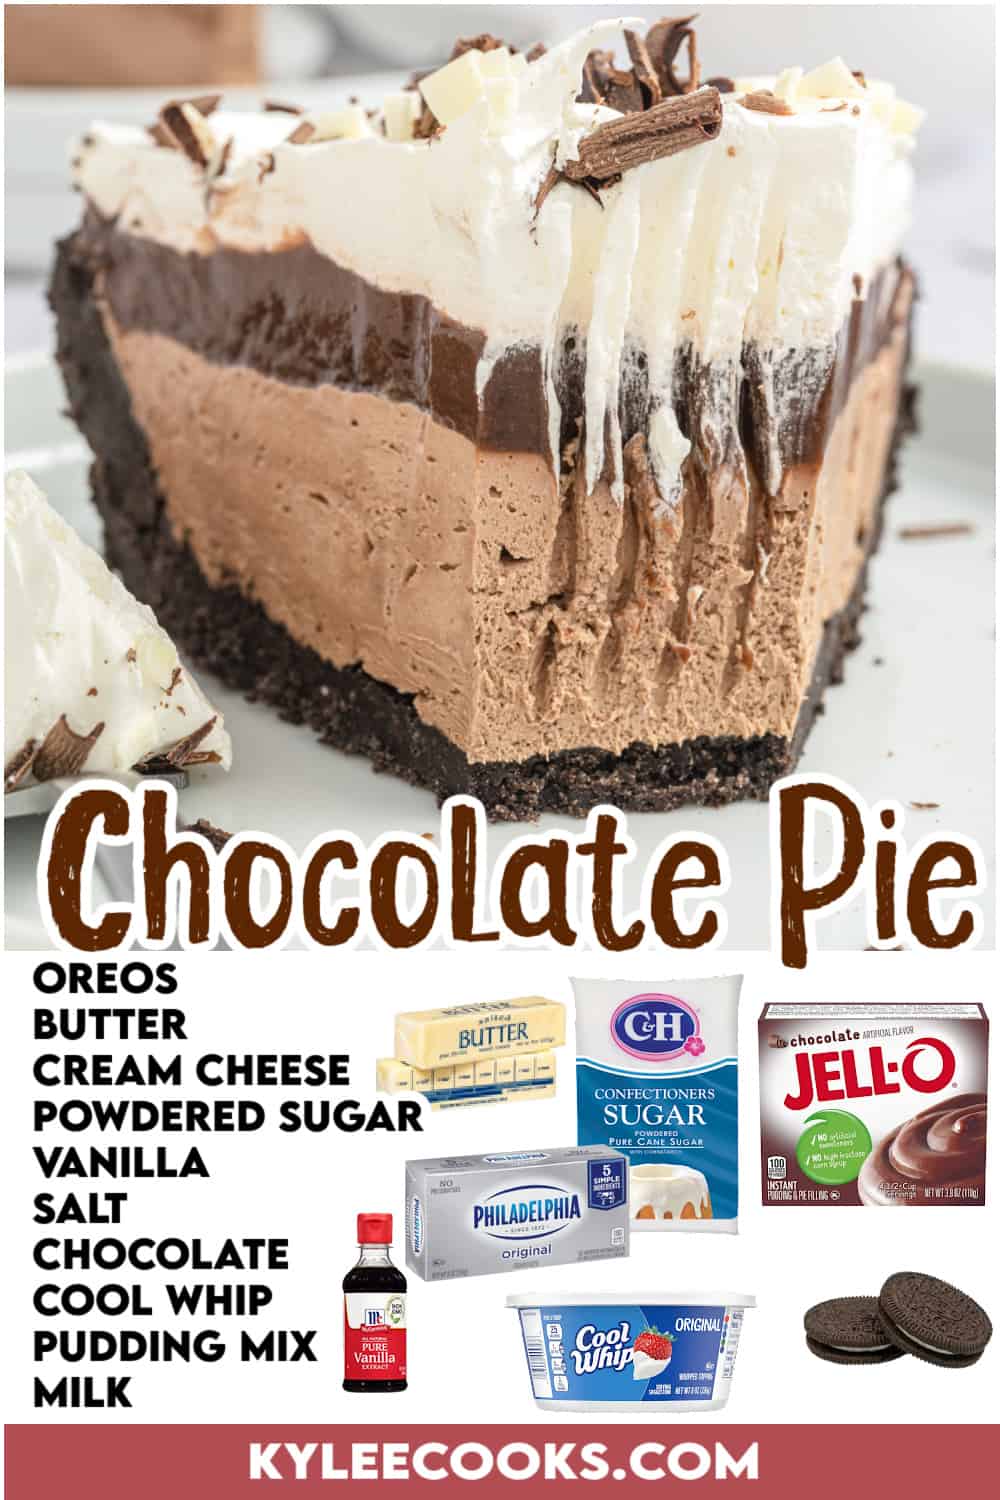 a slice of chocolate pie on a plate with recipe ingredients overlaid in text.